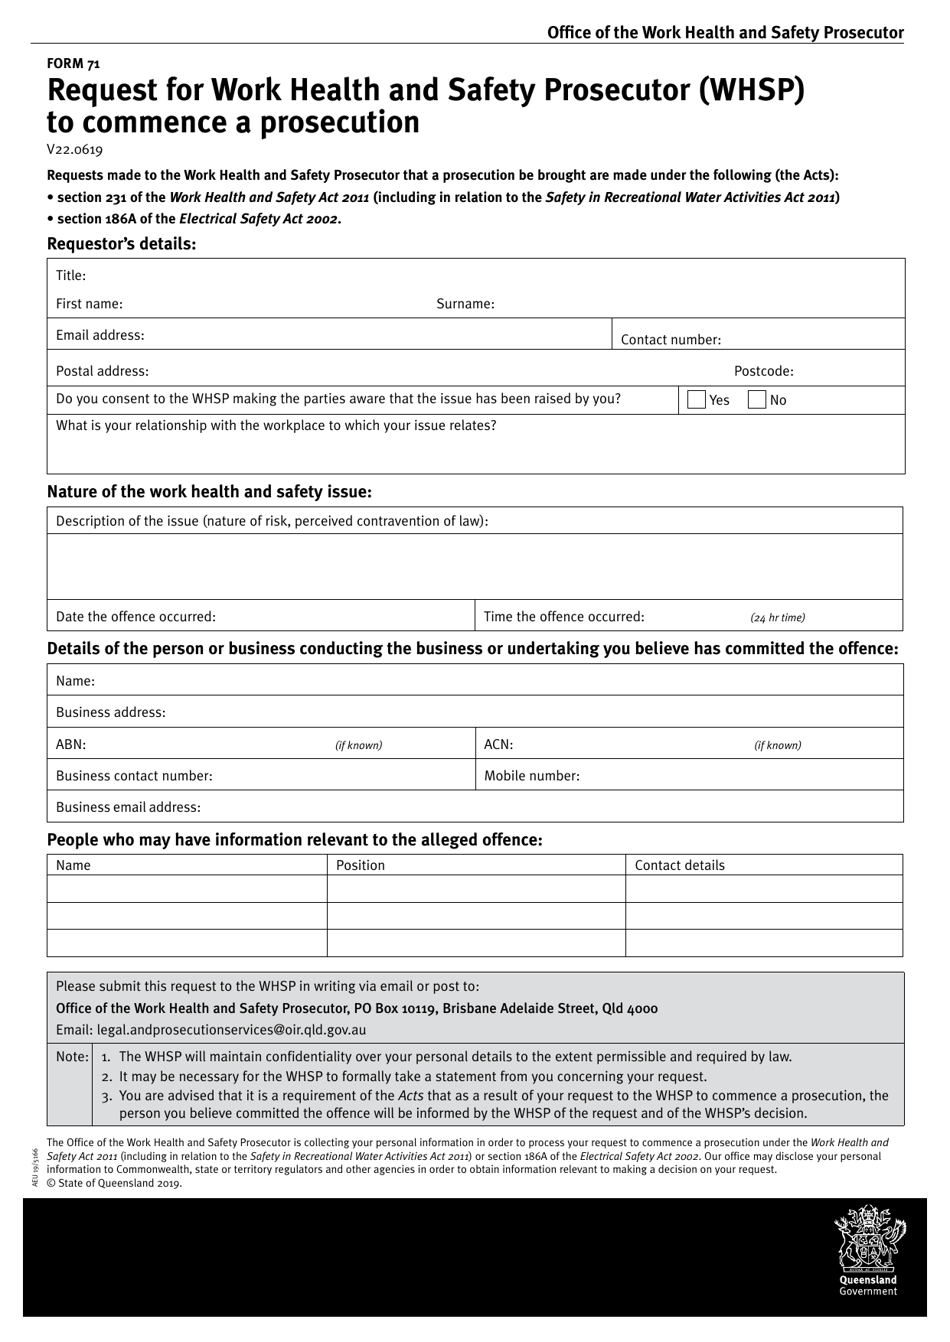 Form 71 Request for Work Health and Safety Prosecutor (Whsp) to Commence a Prosecution - Queensland, Australia, Page 1